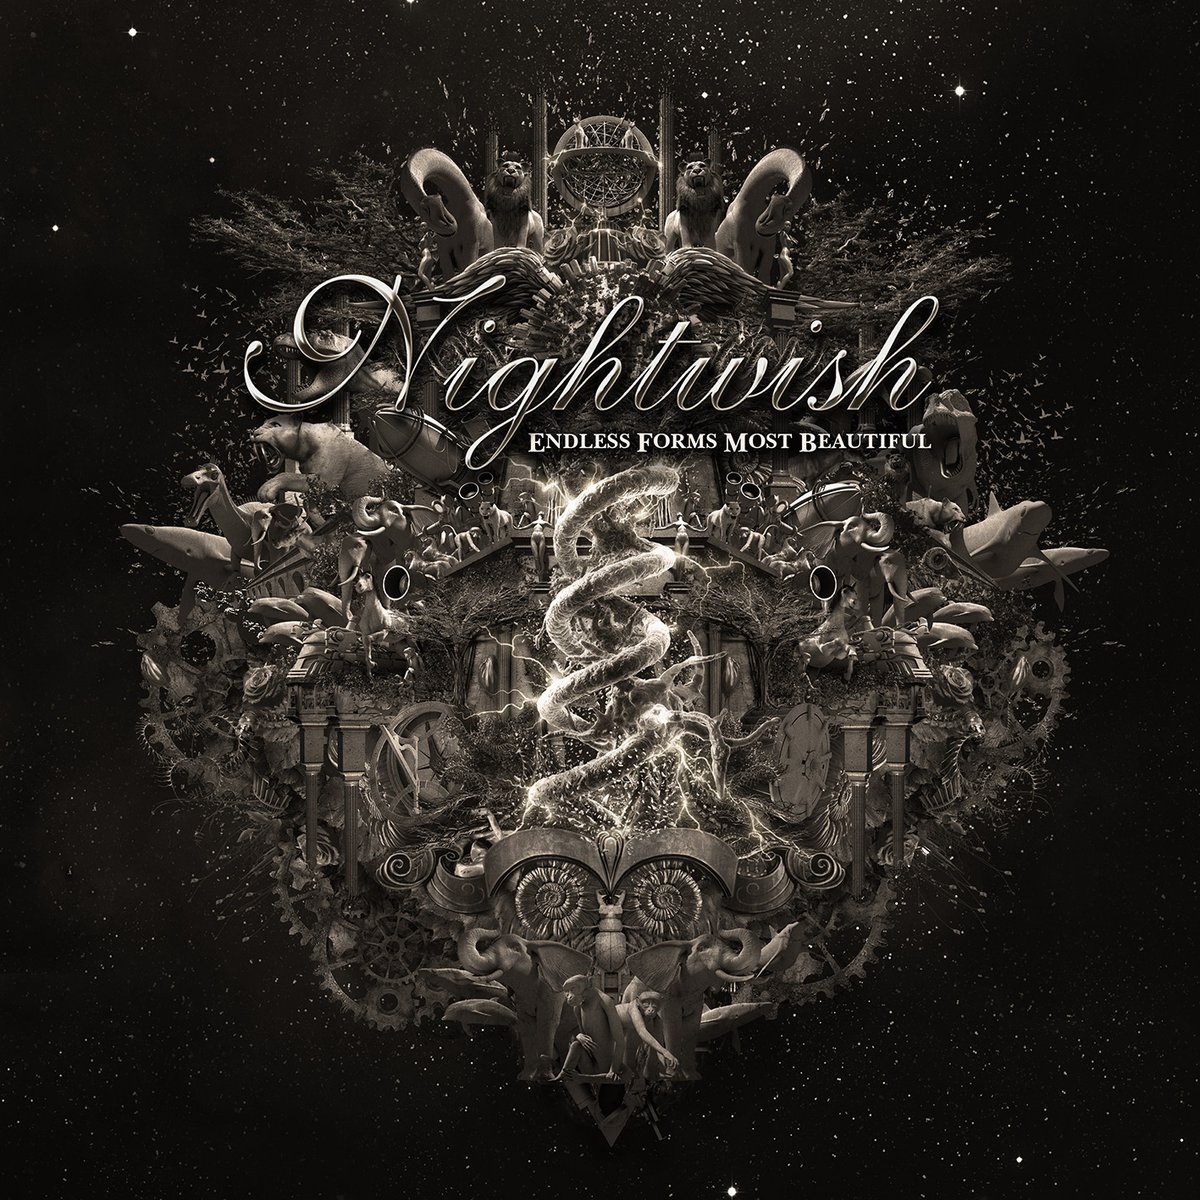 Last month marked the 9th anniversary of the release of 'Endless Forms Most Beautiful.' What are your favorite tracks from this album? bfan.link/endless-forms-… #Nightwish #EndlessFormsMostBeautiful